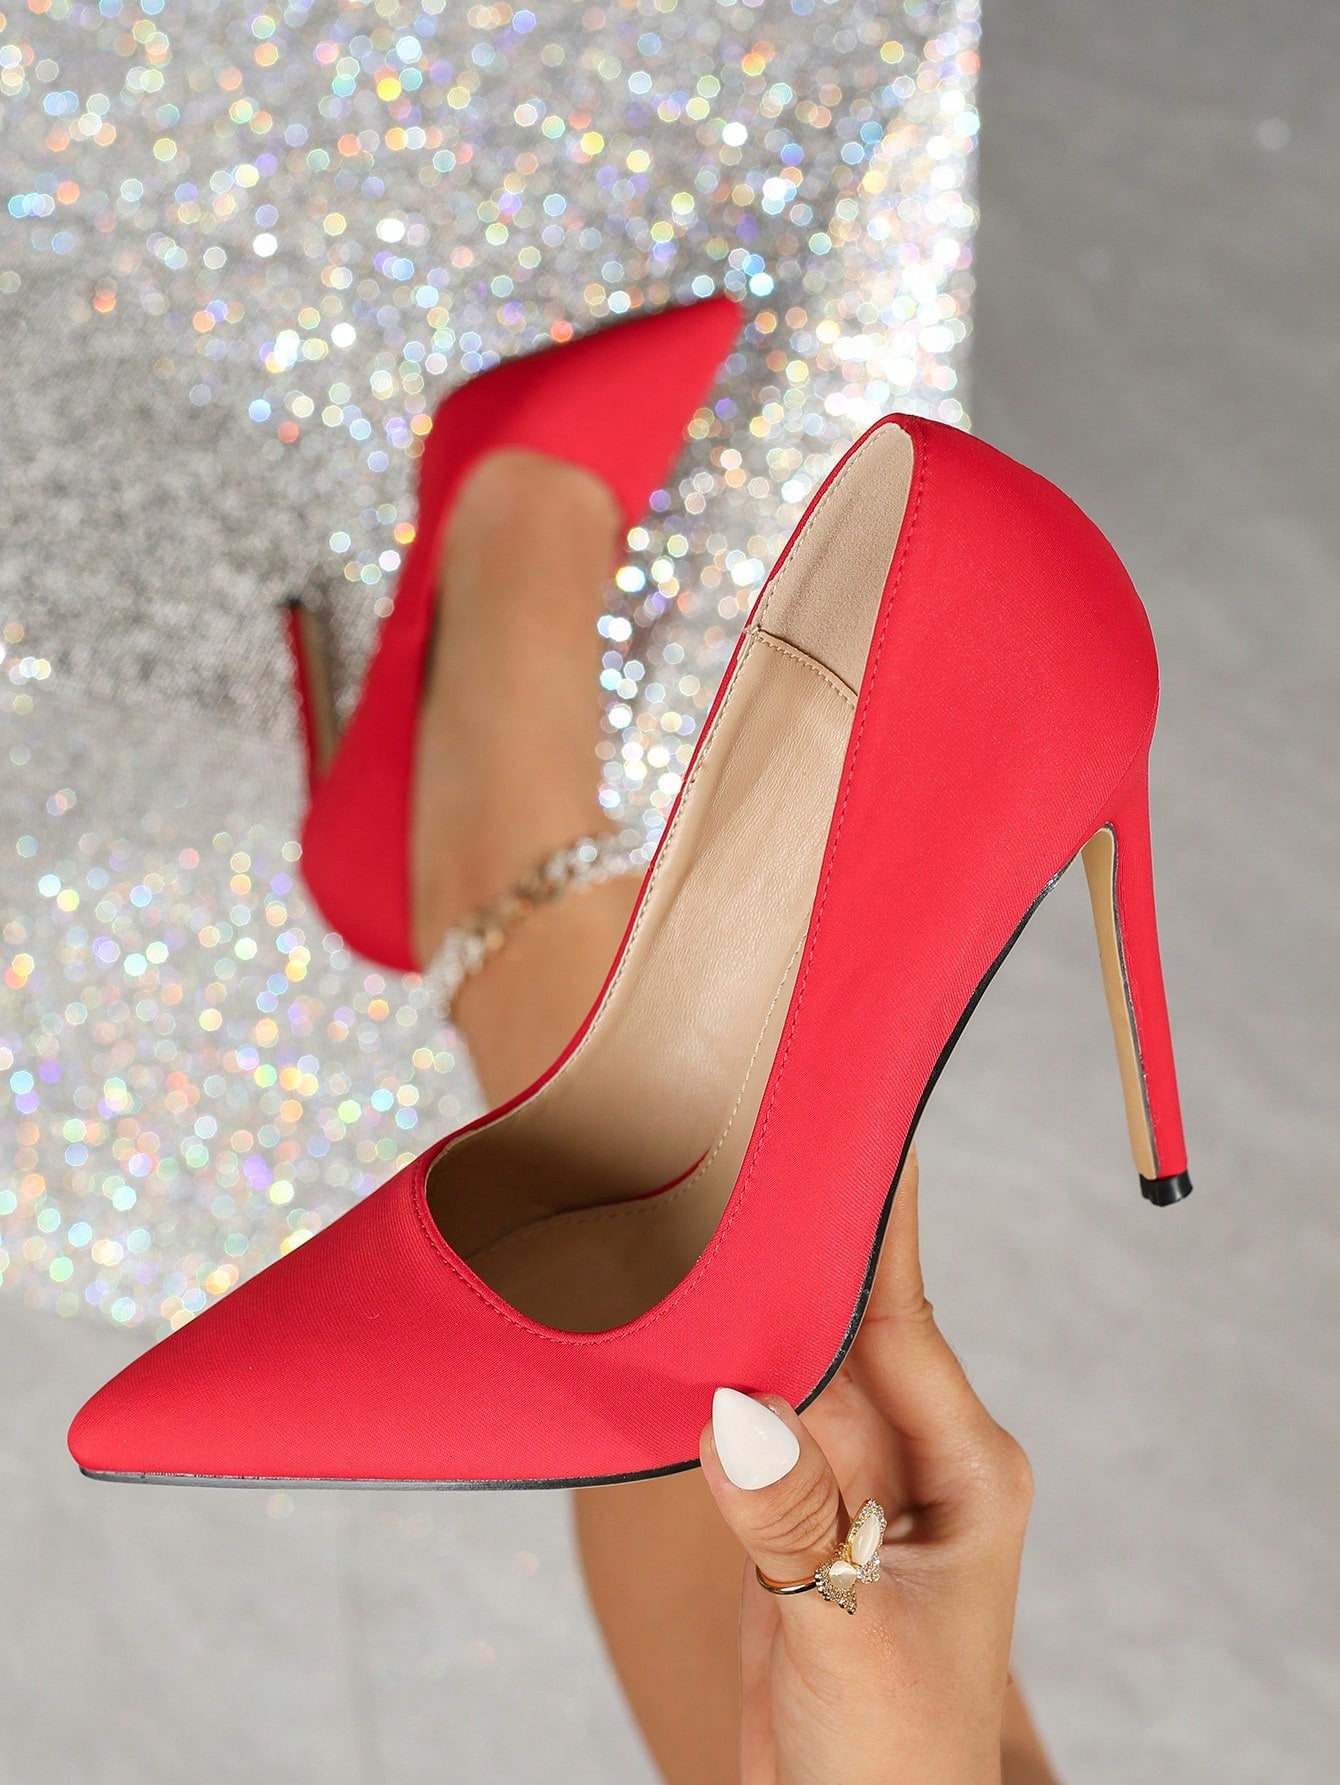 Solid Color High Heel Pumps For Evening Party, Fashionable And Slimming Design